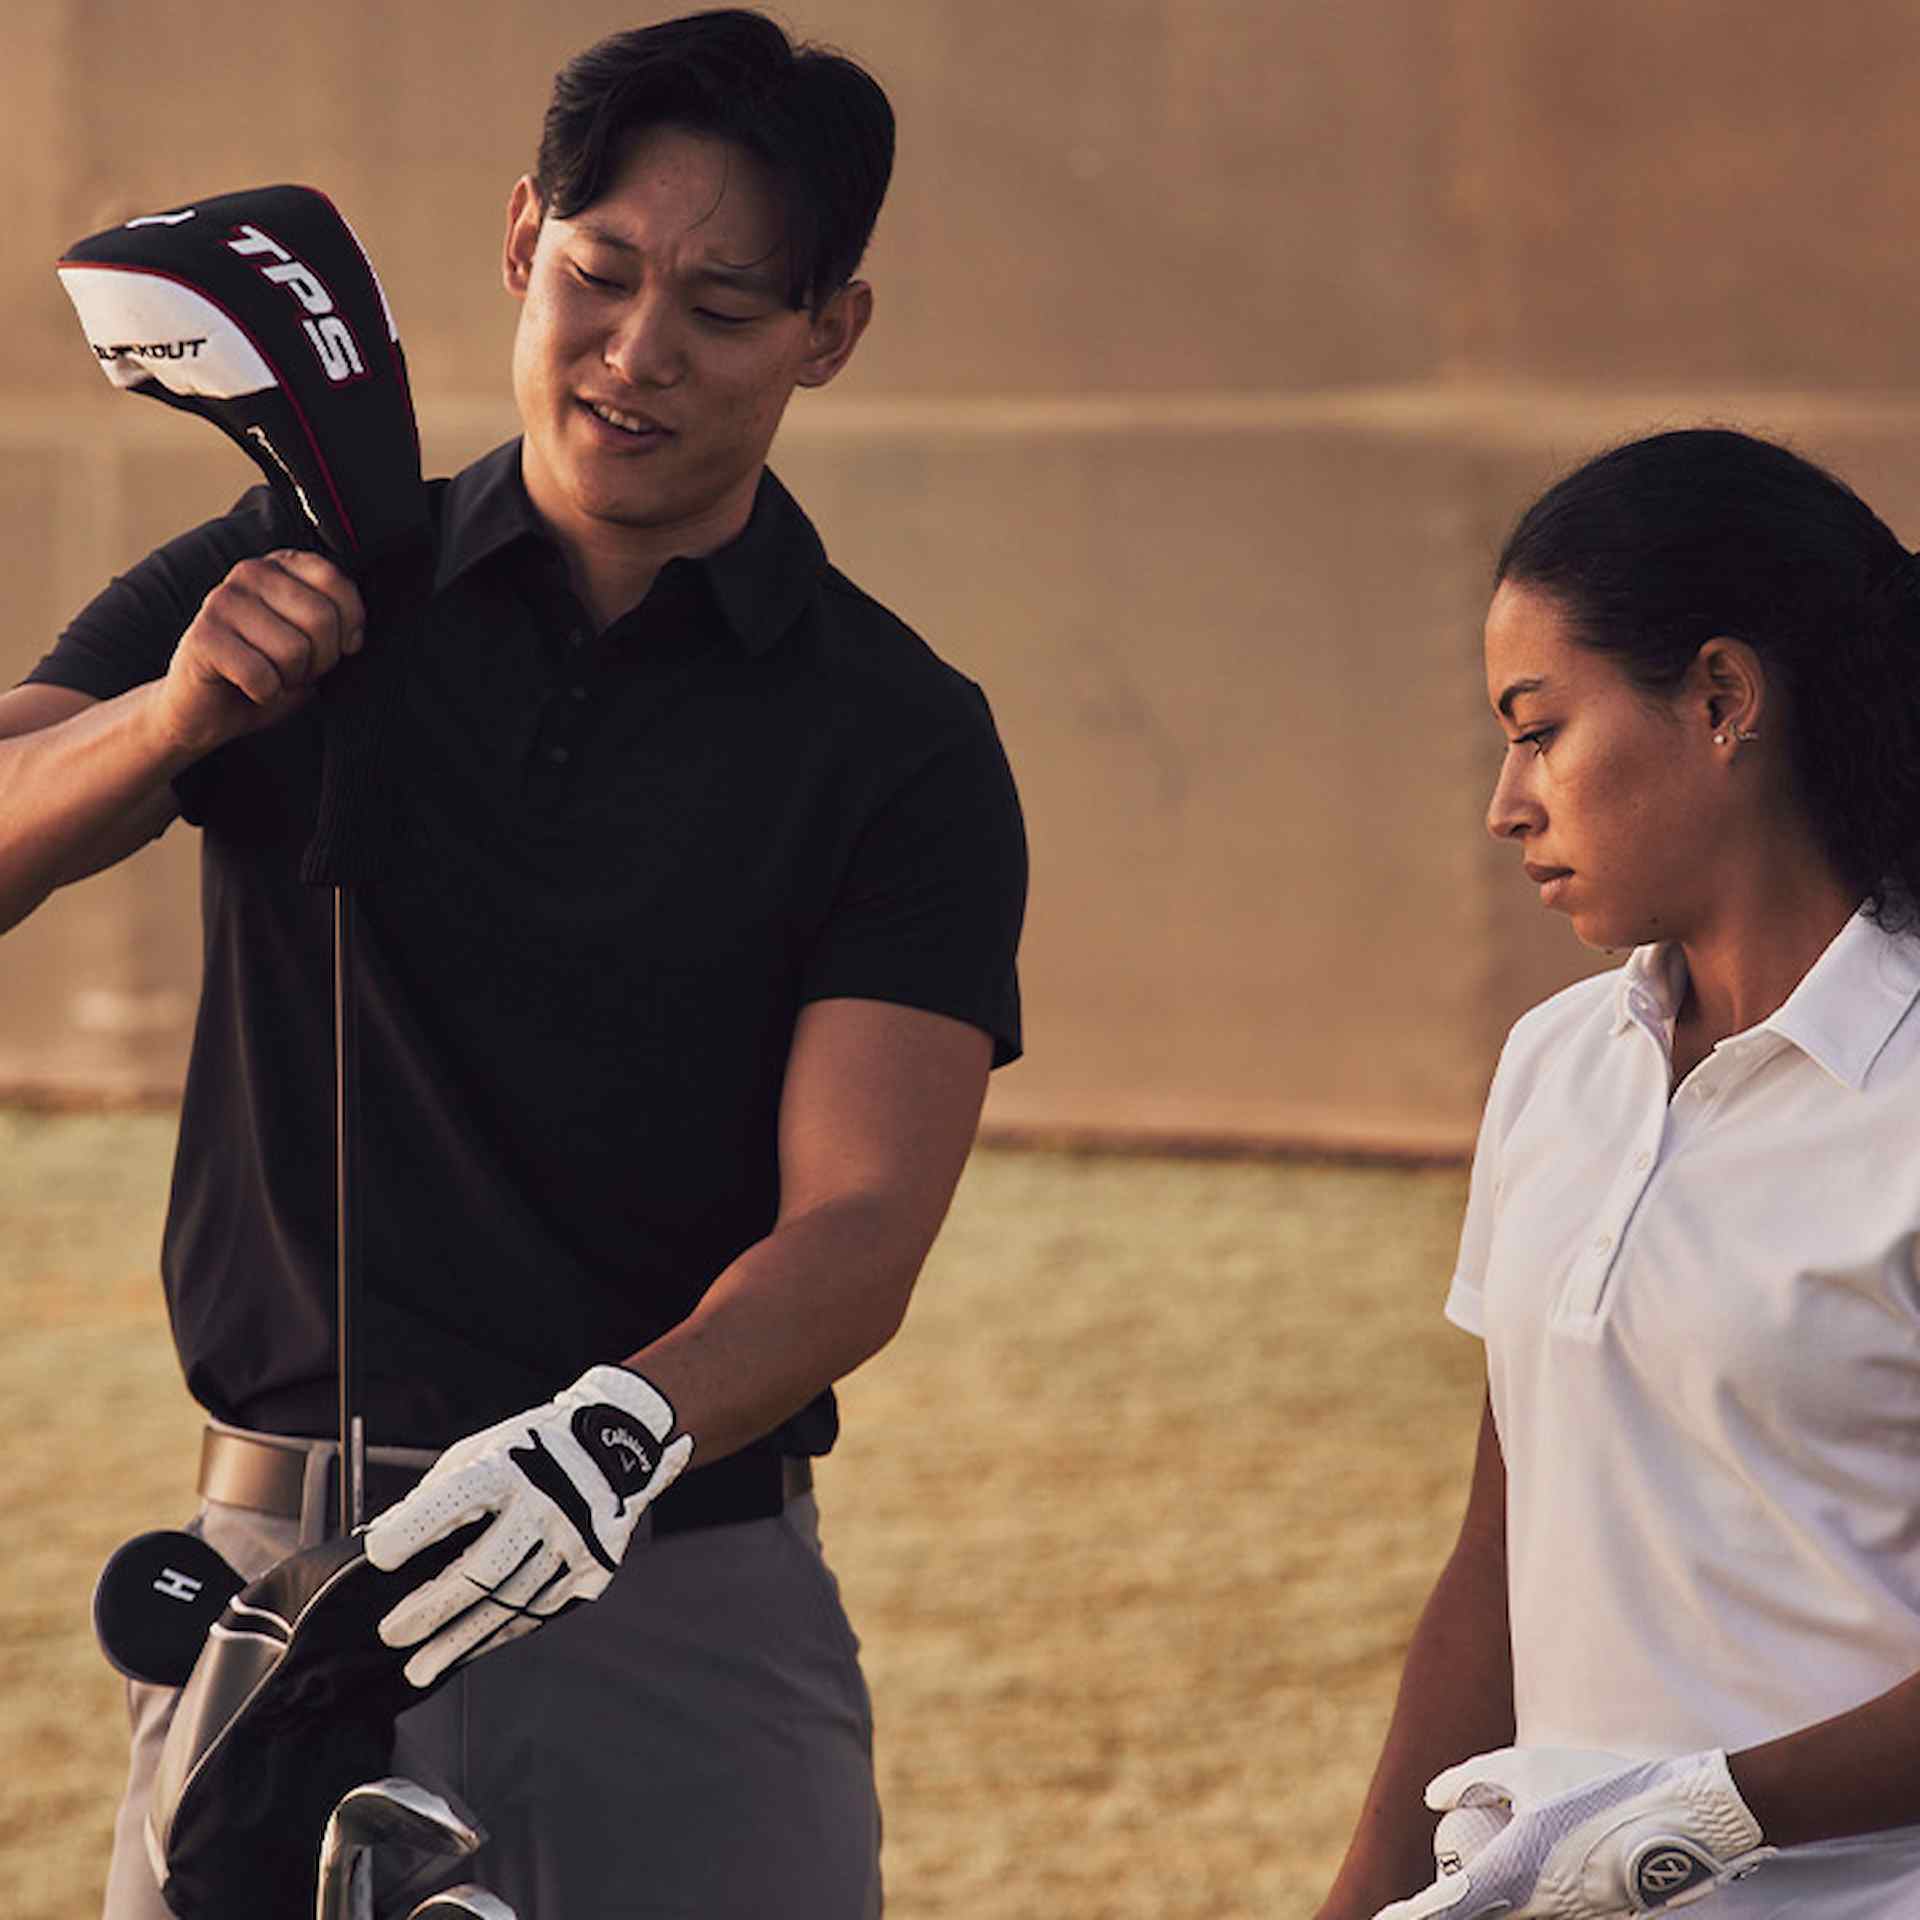 Female and Male athlete pulling out golf clubs outside